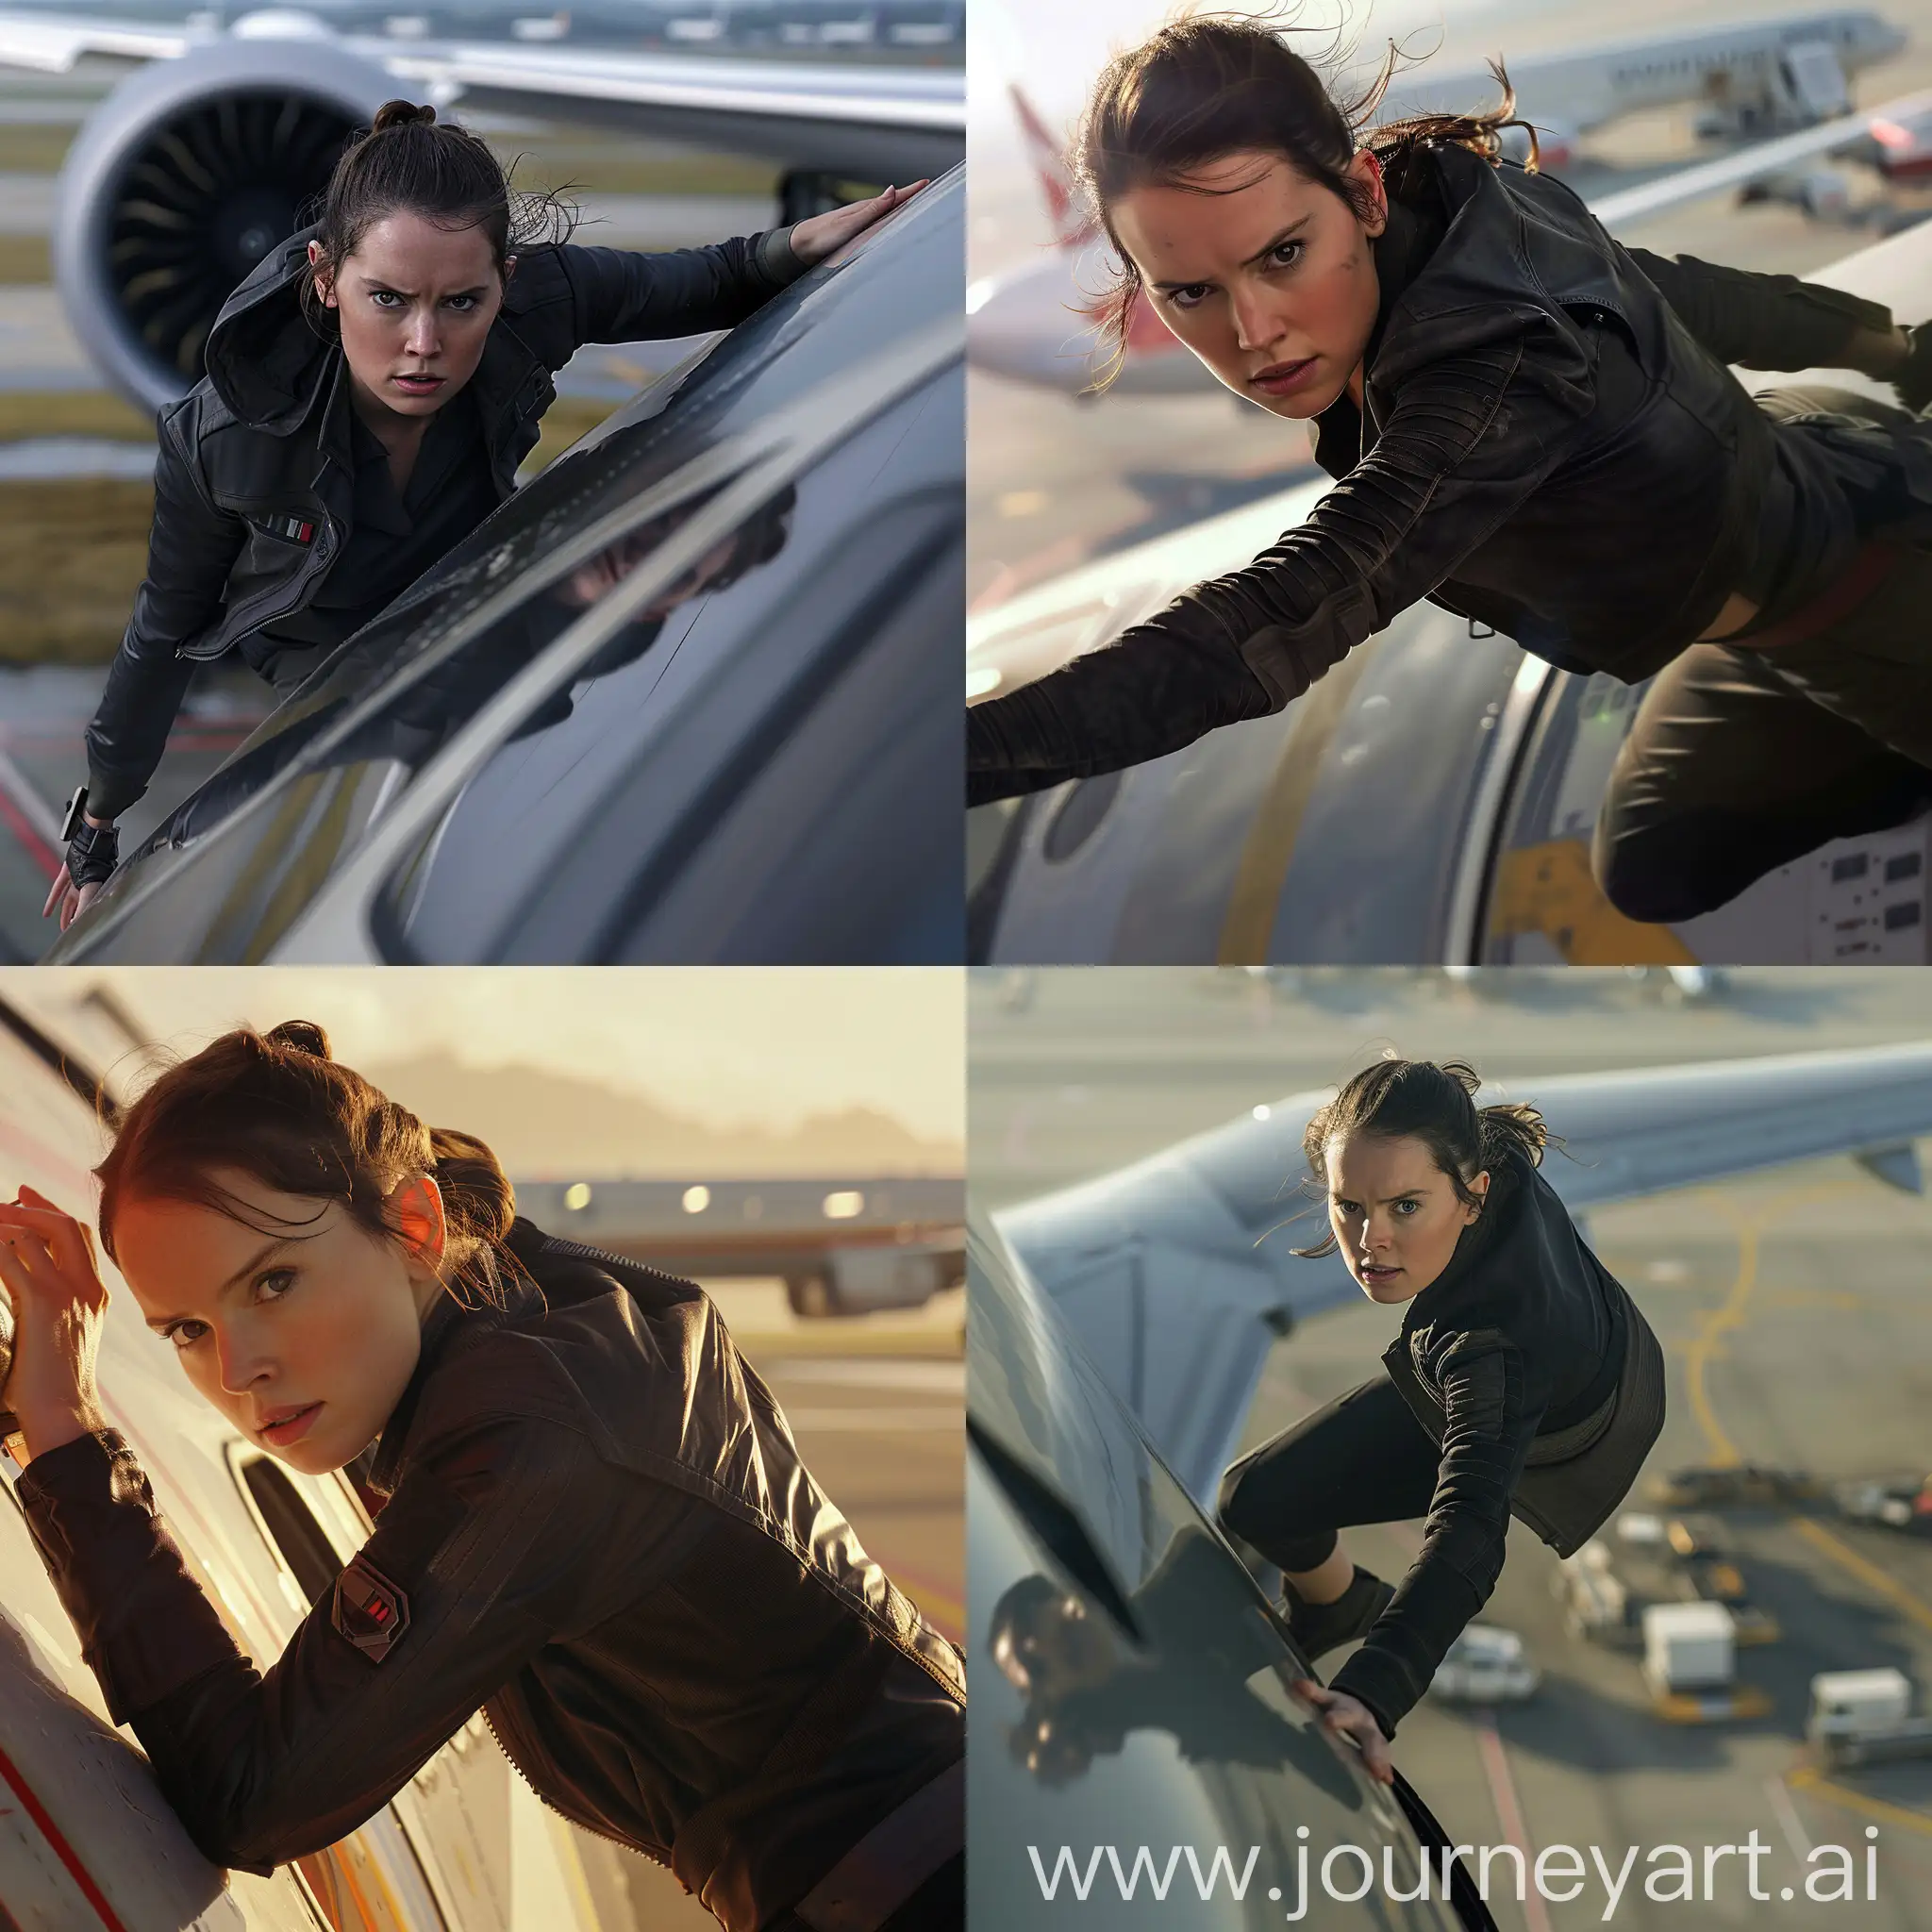 Daisy-Ridley-as-Rey-Skywalker-Hangs-on-Moving-Plane-Wing-Mission-Impossible-Scene